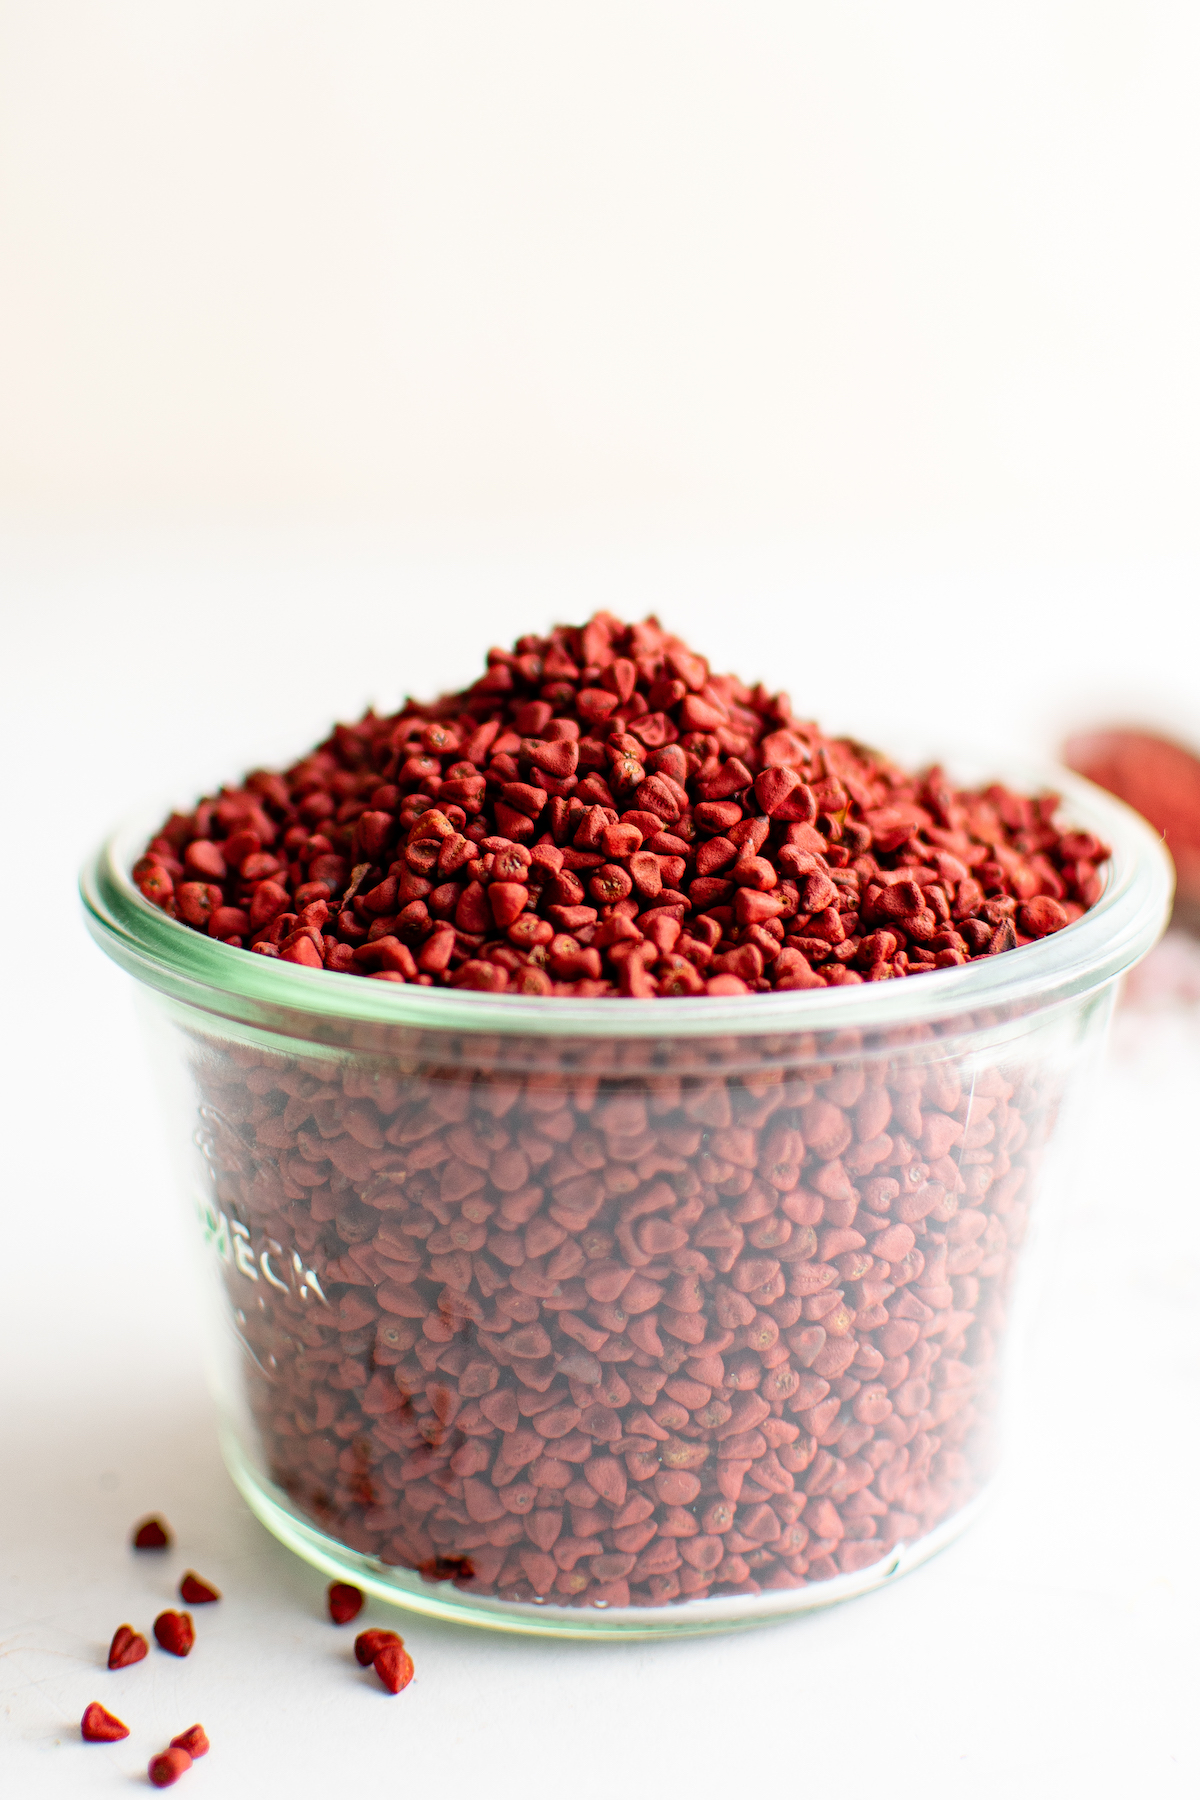 Annatto seeds in a small measuring cup.